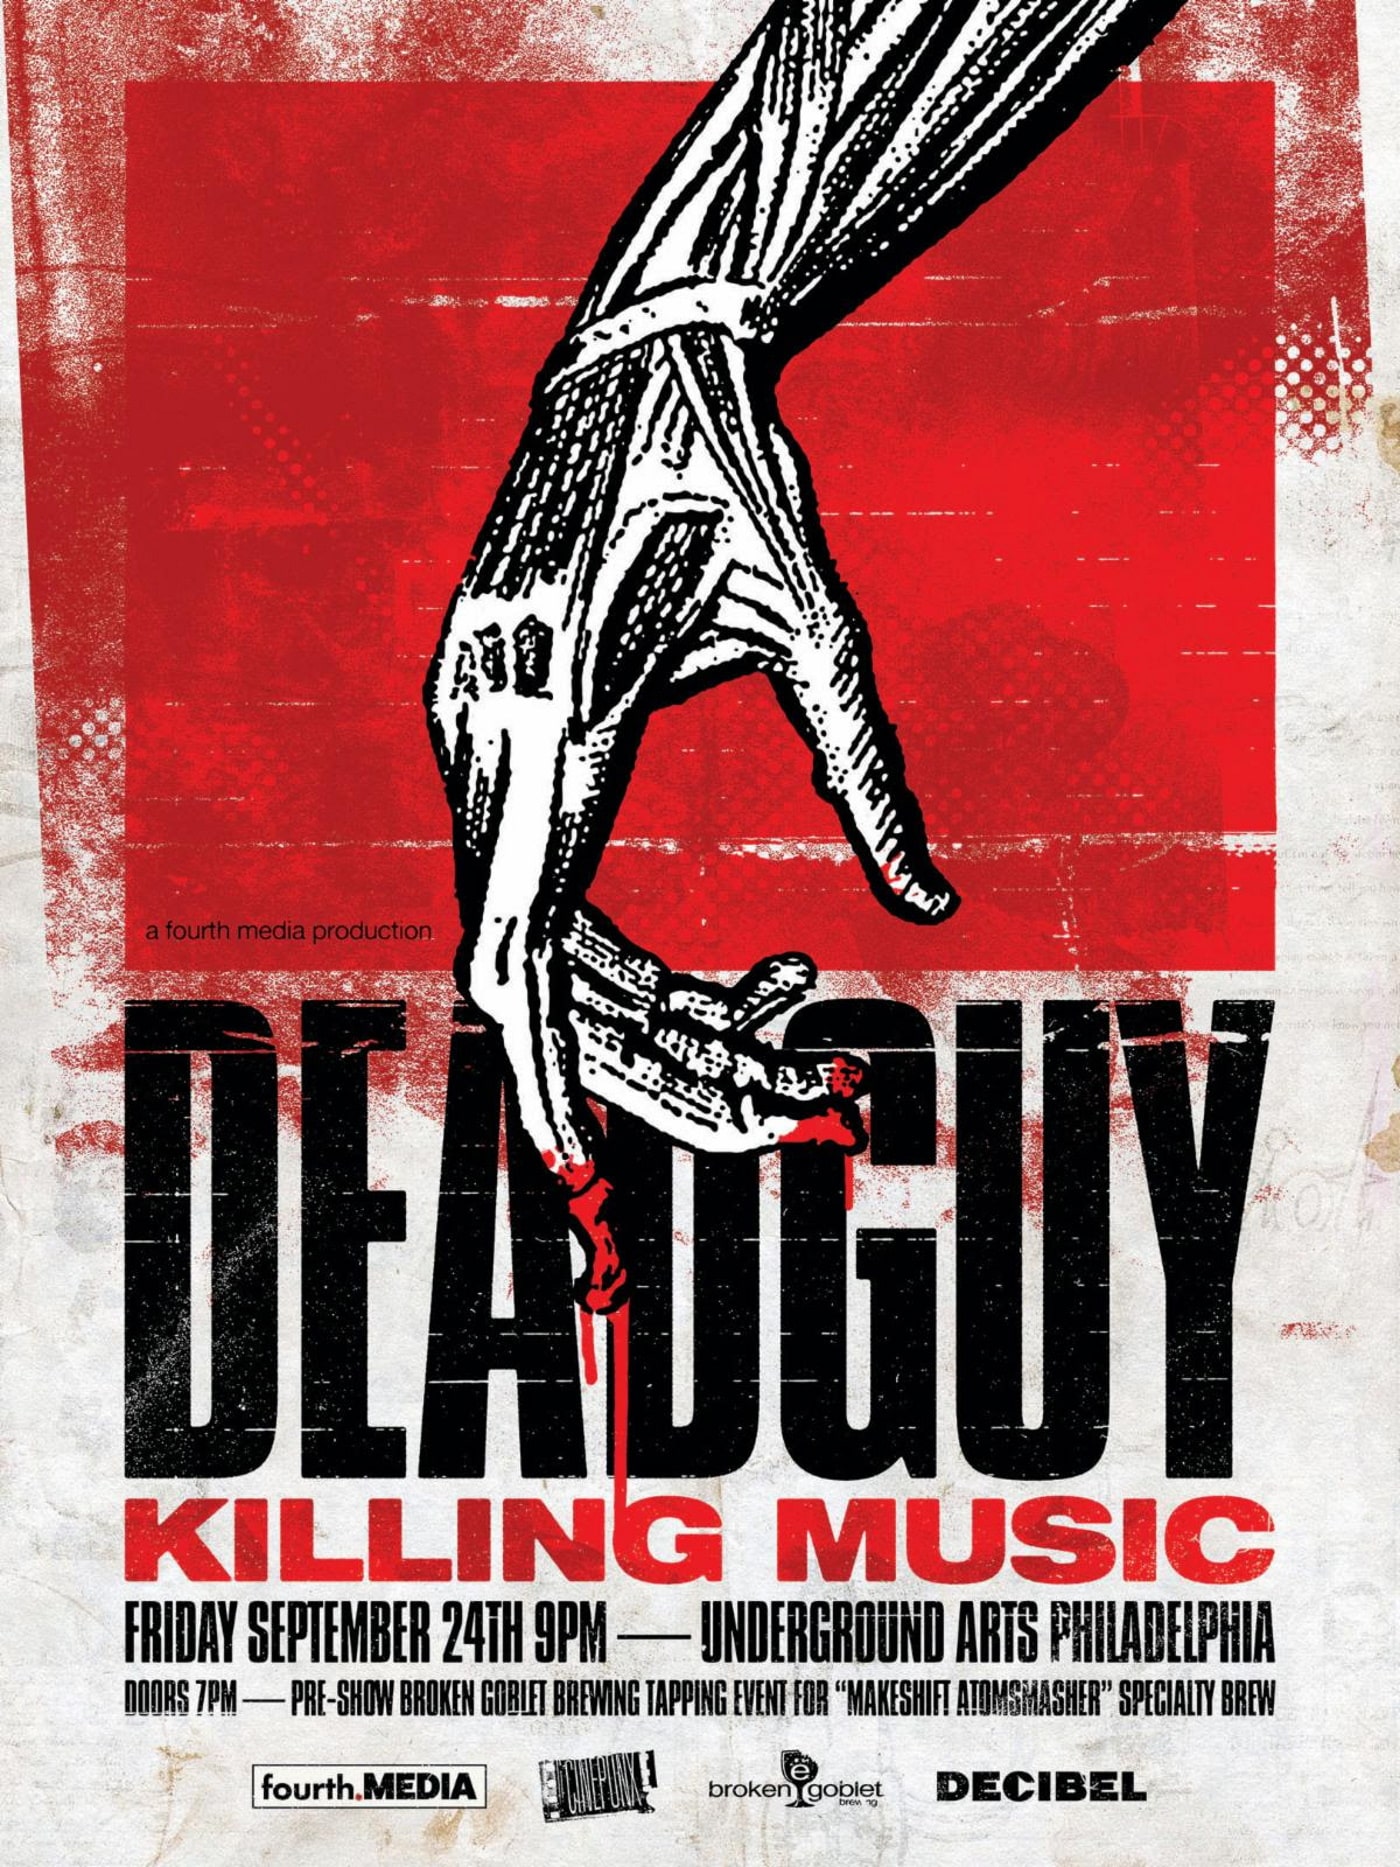 Killing Music: the official documentary celebrating infamous New Jersey noise-driven hardcore antagonizers DEADGUY coming up!